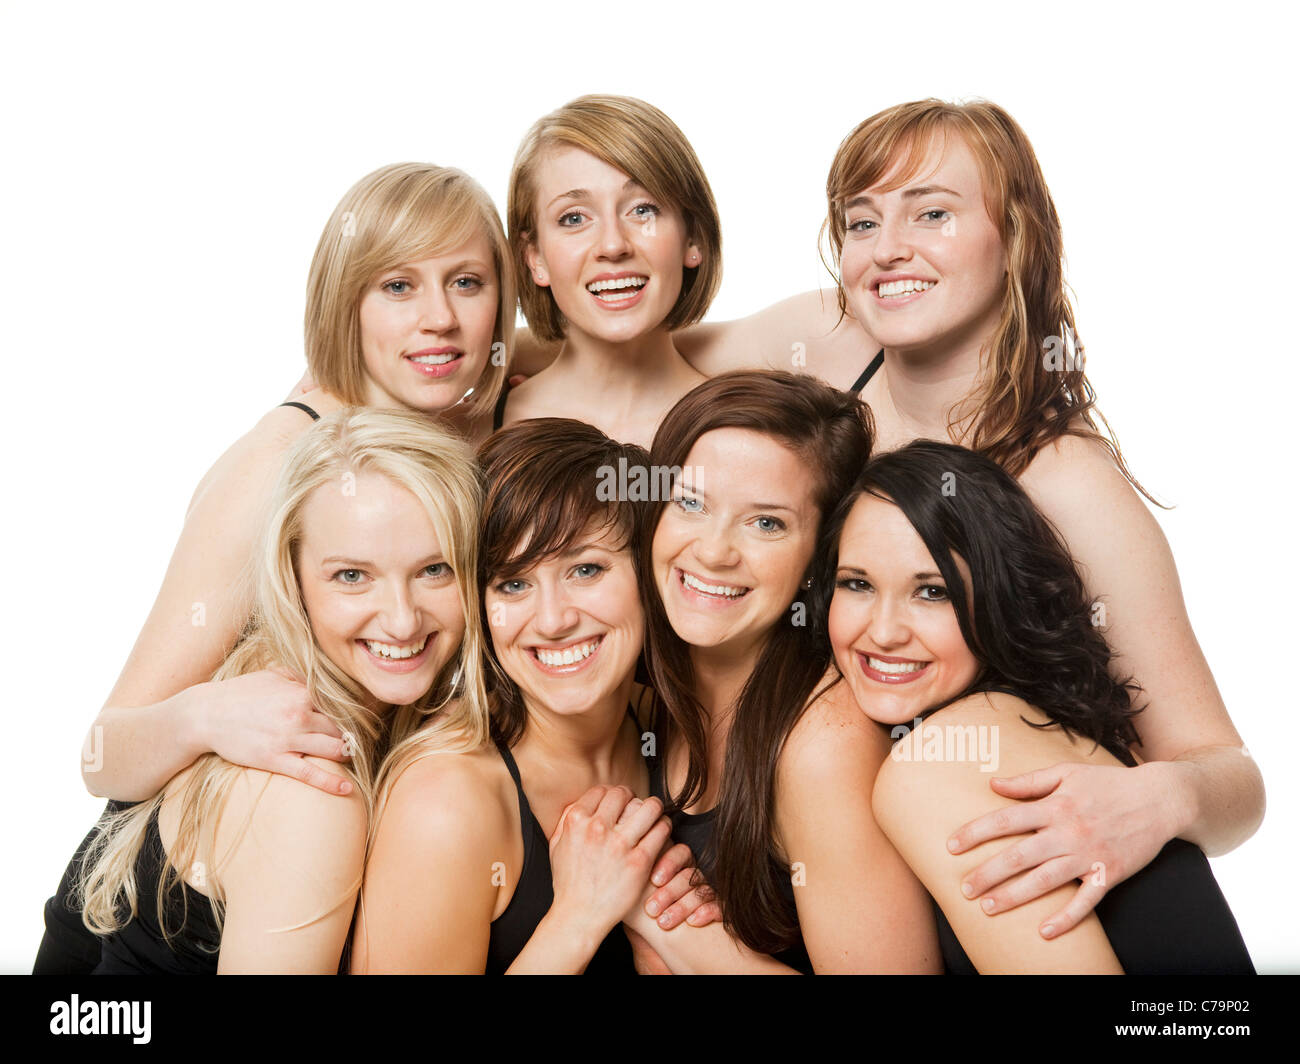 Studio shot of happy young women posing together Stock Photo